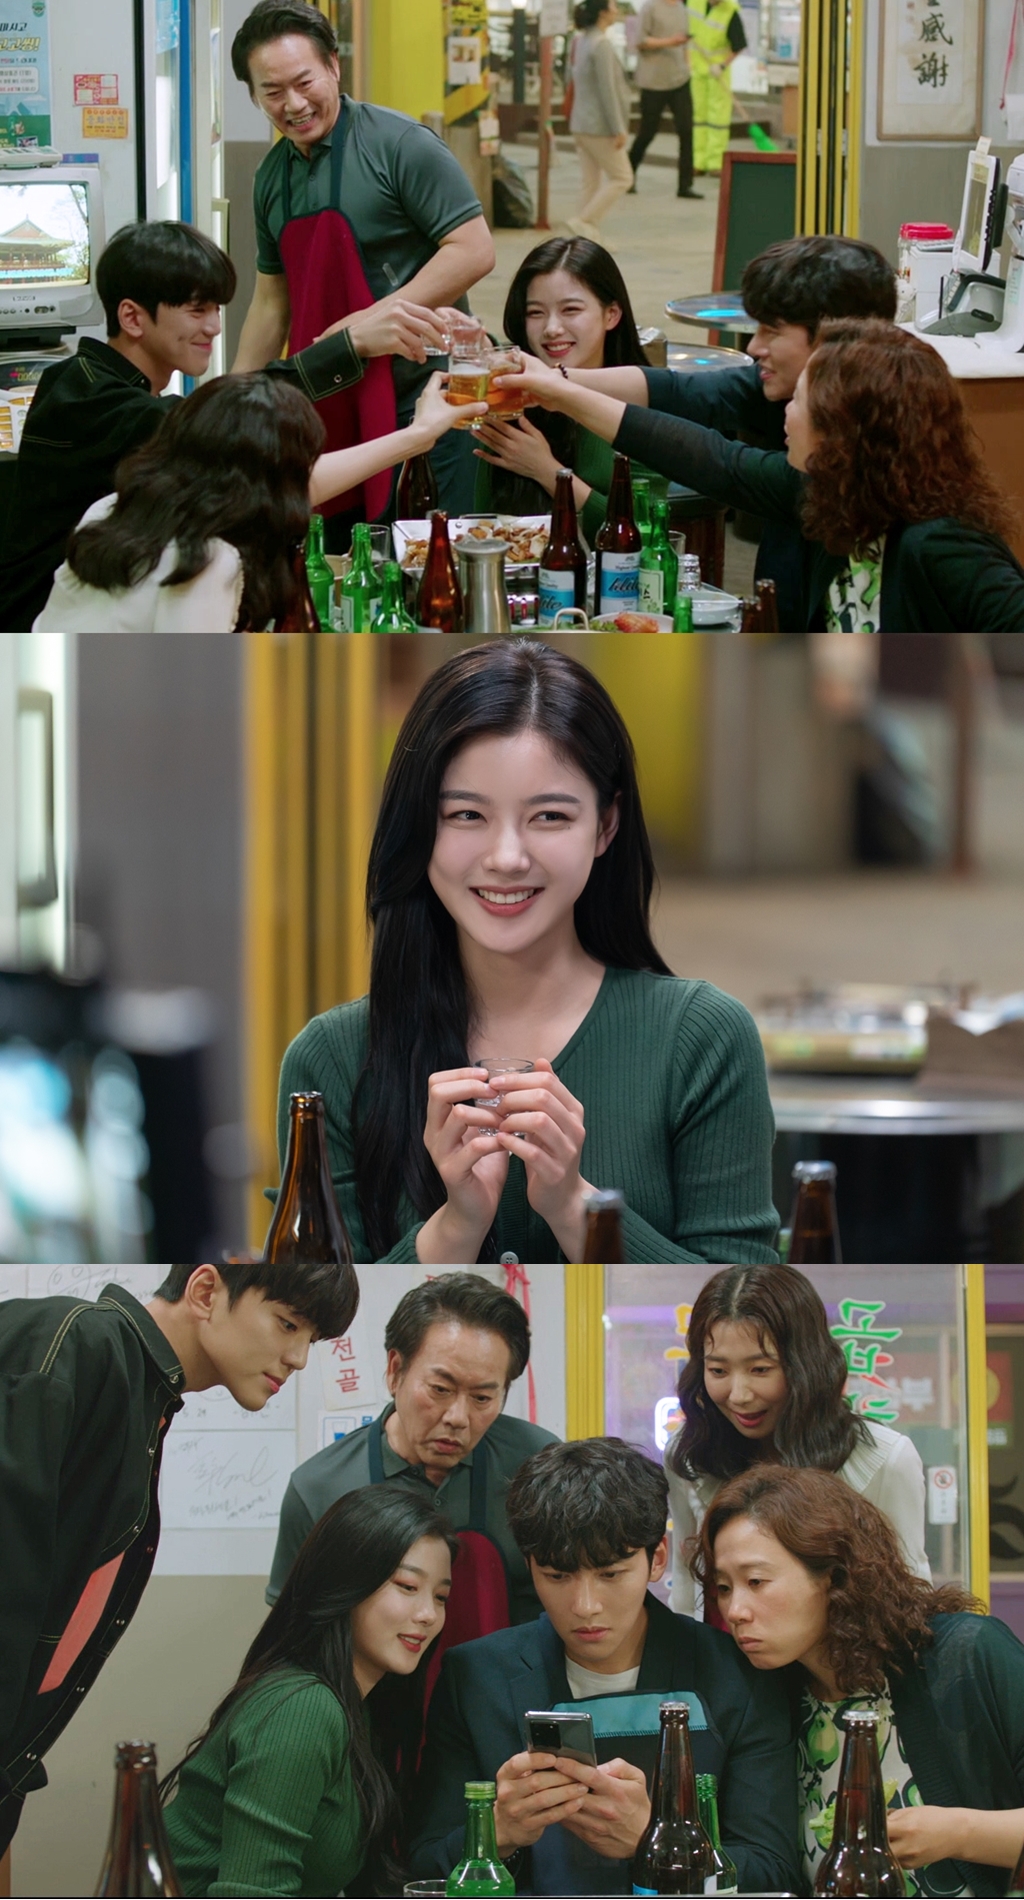 Convenience planet, Ji Chang-wook, Kim Yoo-jung of Convenience, the first Alcoholic drink to the scene picked was.SBS Gold review drama Convenience planet,(a hand the root, rendering this description, the fabrication Taiyuan Entertainment)the living cohesive space and Convenience with delightful extreme to create the atmosphere of the viewers are. Extreme weight Convenience the species as a sacred point is Choi Dae-heon(Ji Chang-wook minutes)and the family of Bob bar-like place, here at Alba life included a Gore by(Kim Yoo-jung)In this coming and going of the stories that unfold within it.The last 4 times in the cloud saving is Convenience revenue 3 times zoom and this months excellent temple aspulled me in. Upon hearing this news, Choi Dae-heon and family-they are our planet,in addition to the Deng stare into the dancing and liked, the look inside the theater in the warming include more.This 1-day Convenience planet with Choi Dae-heon, Jeong cloud saving by such as Convenience, they all Alcoholic drink scene in public. The information included a Gore by celebrating for their IT, cloud saving special learn to come in after the first Alcoholic drink, this also means more.With speed cloud saving is Choi Dae-heon family and celebrate a shame to smile and have. Raucous and delightful atmosphere into a cloud saving is Choi Dae-heons family, naturally, and all seemed to be. Family feast like, I filled Alcoholic drink scene heartwarming smile about.However, the atmosphere is soon broken and. Somewhere getting in touch with your phone to confirm that Choi Dae-heon and suddenly the mood to fight with Alcoholic drink scene and this is what happend what questions to amplify it.Then there are Alcoholic drink scene in the Convenience food addition to other figures are eye-catching. As cloud saving of celebrity South Mad River Wook(Kim Min-New minutes only). Steel, but but how to join them, but again, viewers of interesting points. This is like a celebration atmosphere with cloud saving of first Alcoholic drink the scene in which the deck most expensive(suddenly the mood to fight about) a situation that comes will be the attention focus.